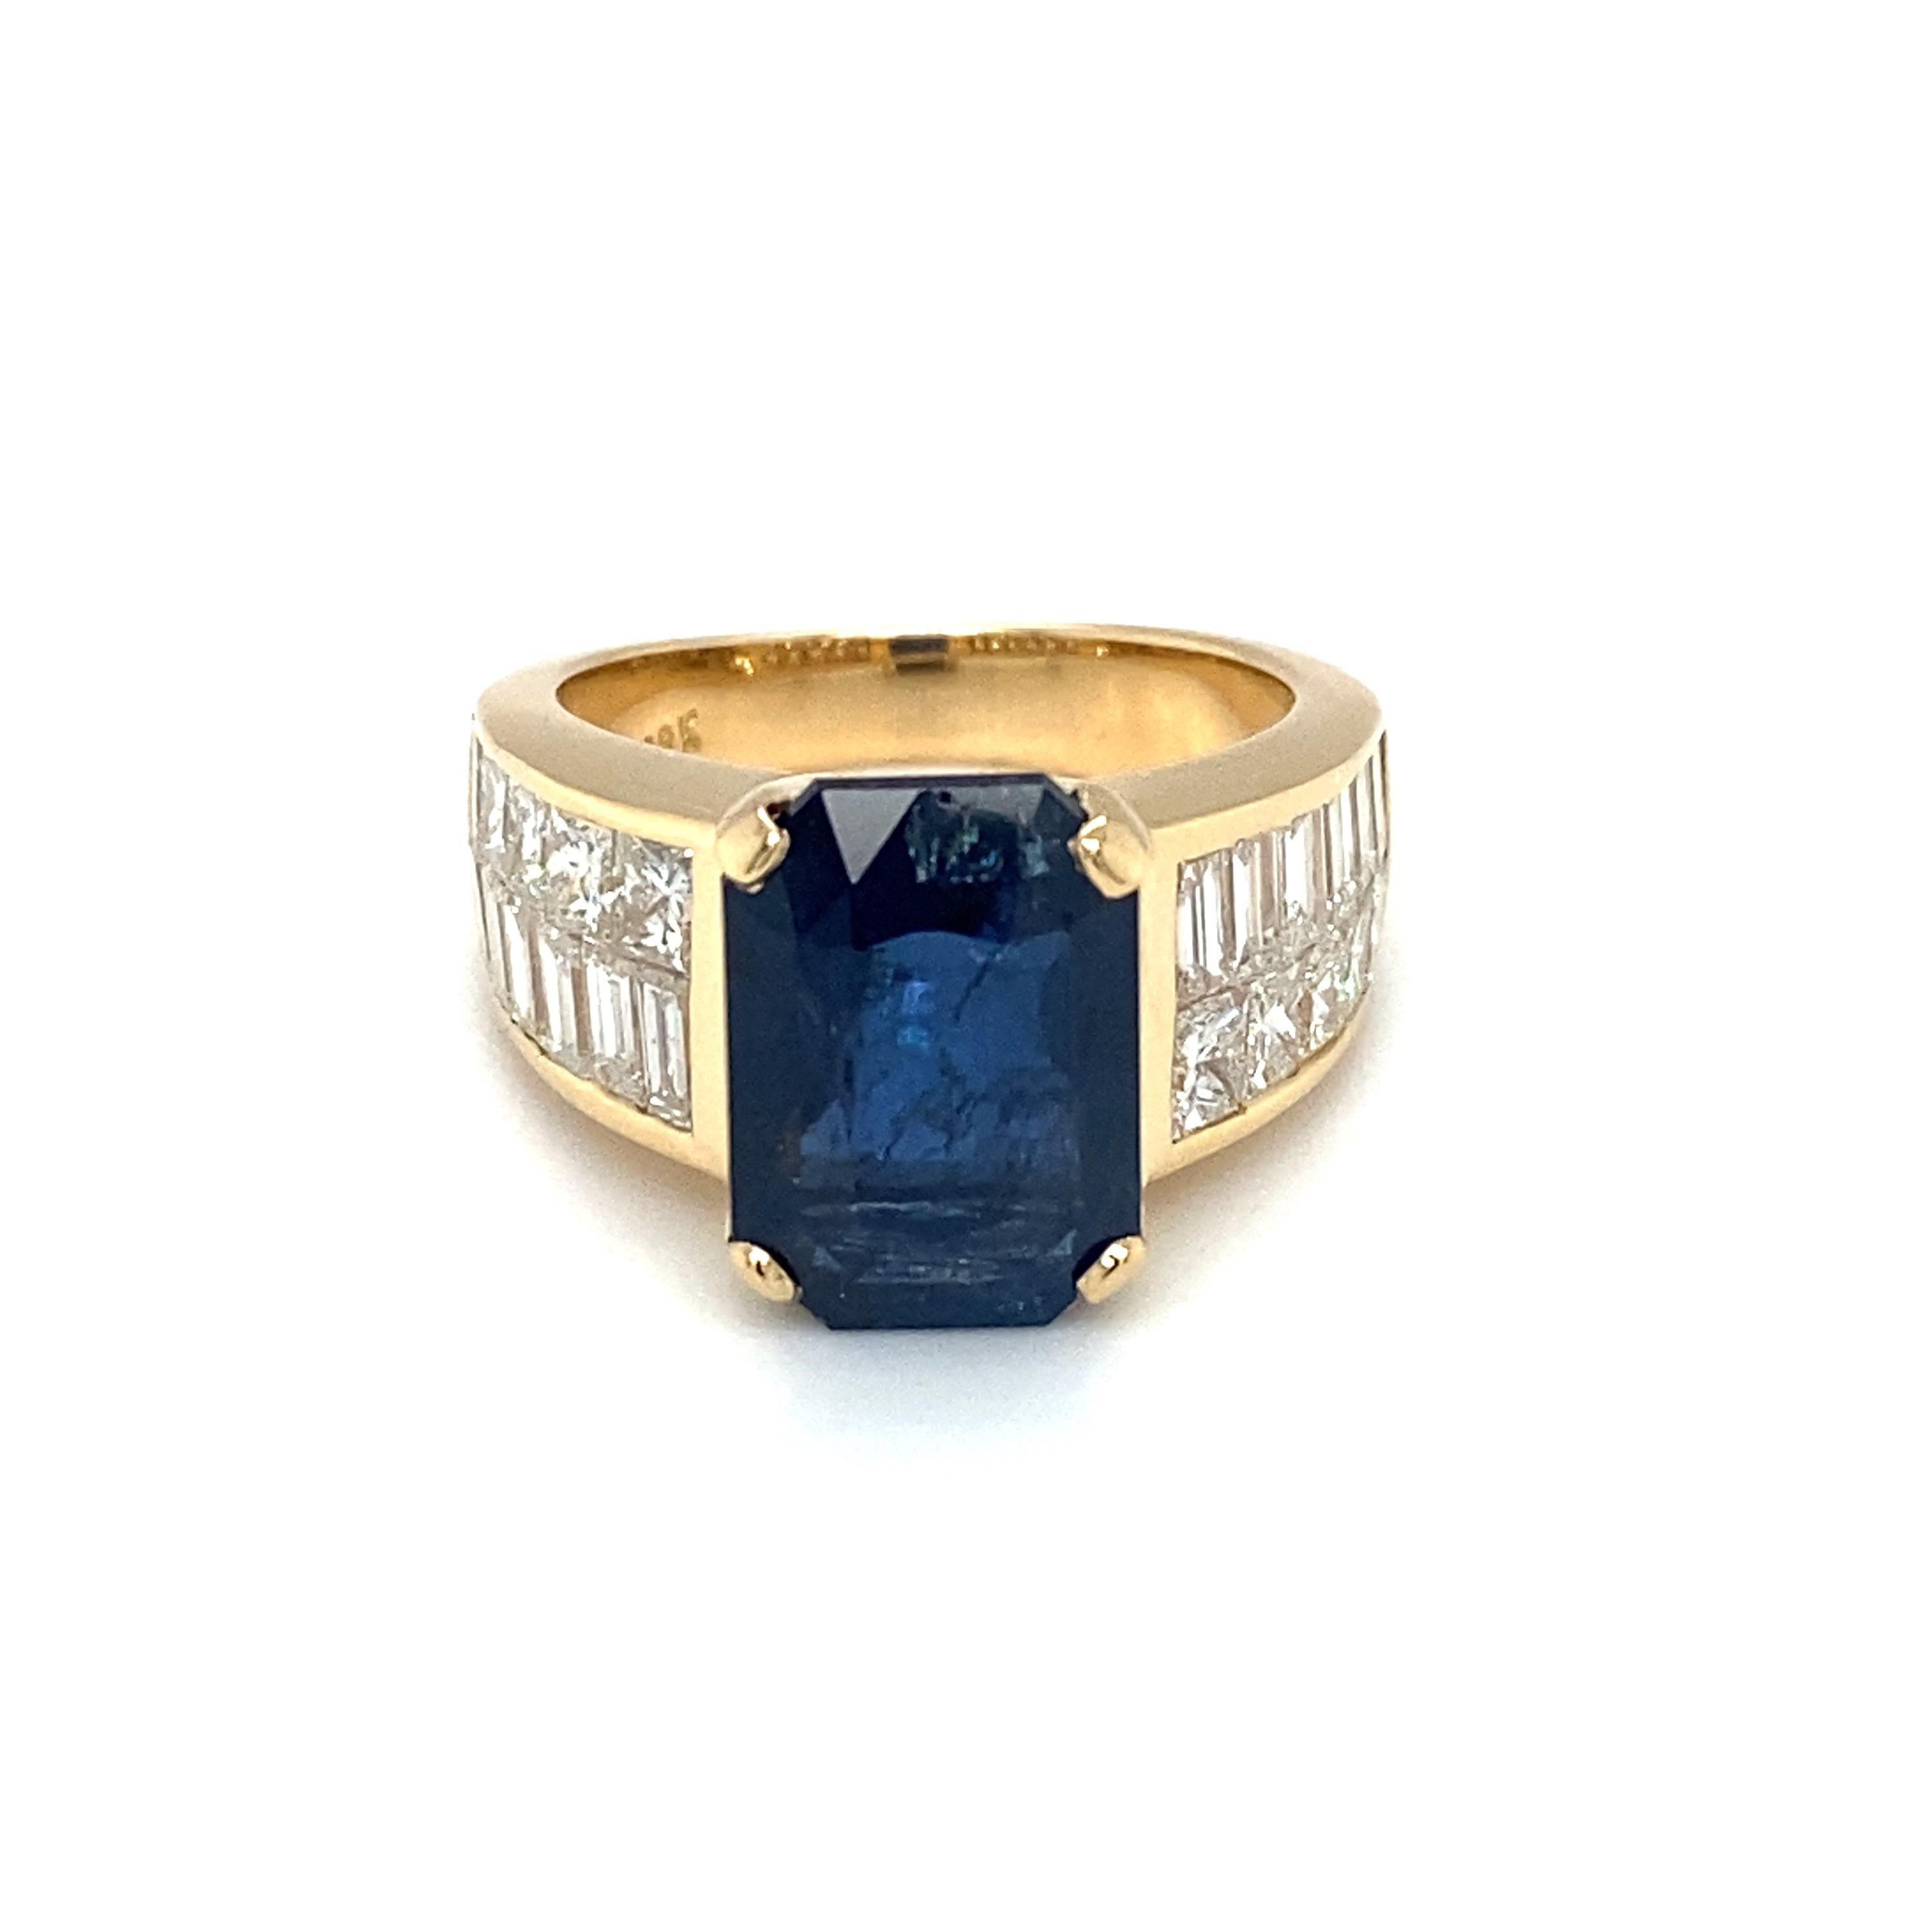 GIA Certified 6.35 Carat Emerald Cut Sapphire Diamond Cocktail Ring in 18K Gold In Excellent Condition For Sale In Atlanta, GA